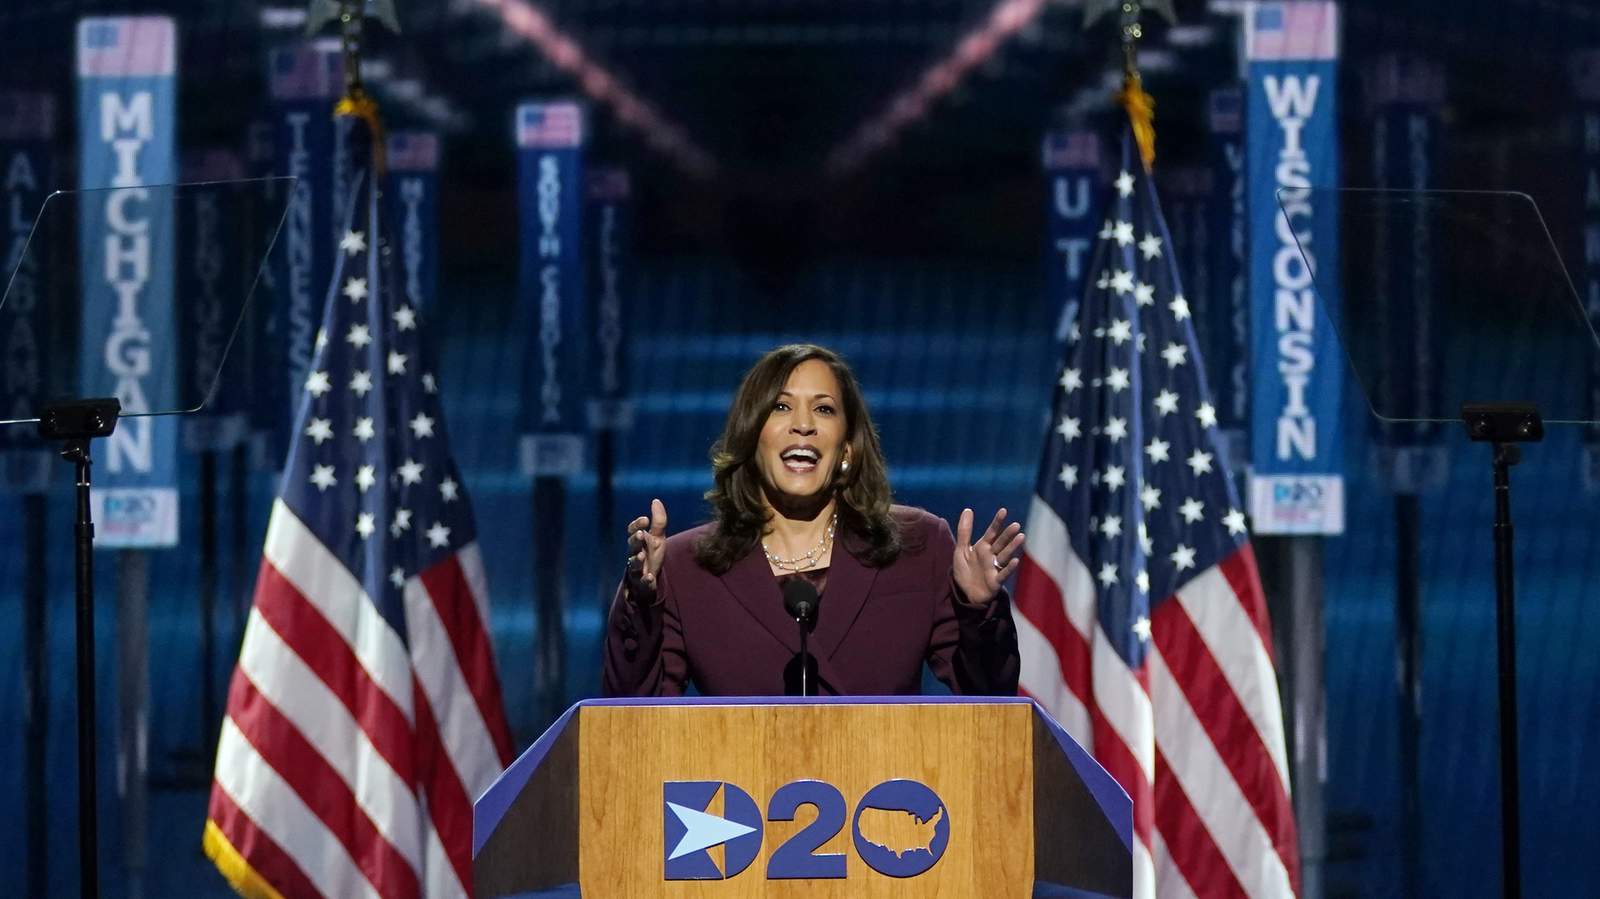 AP FACT CHECK: Kamala Harris meets constitutional requirements to serve as VP